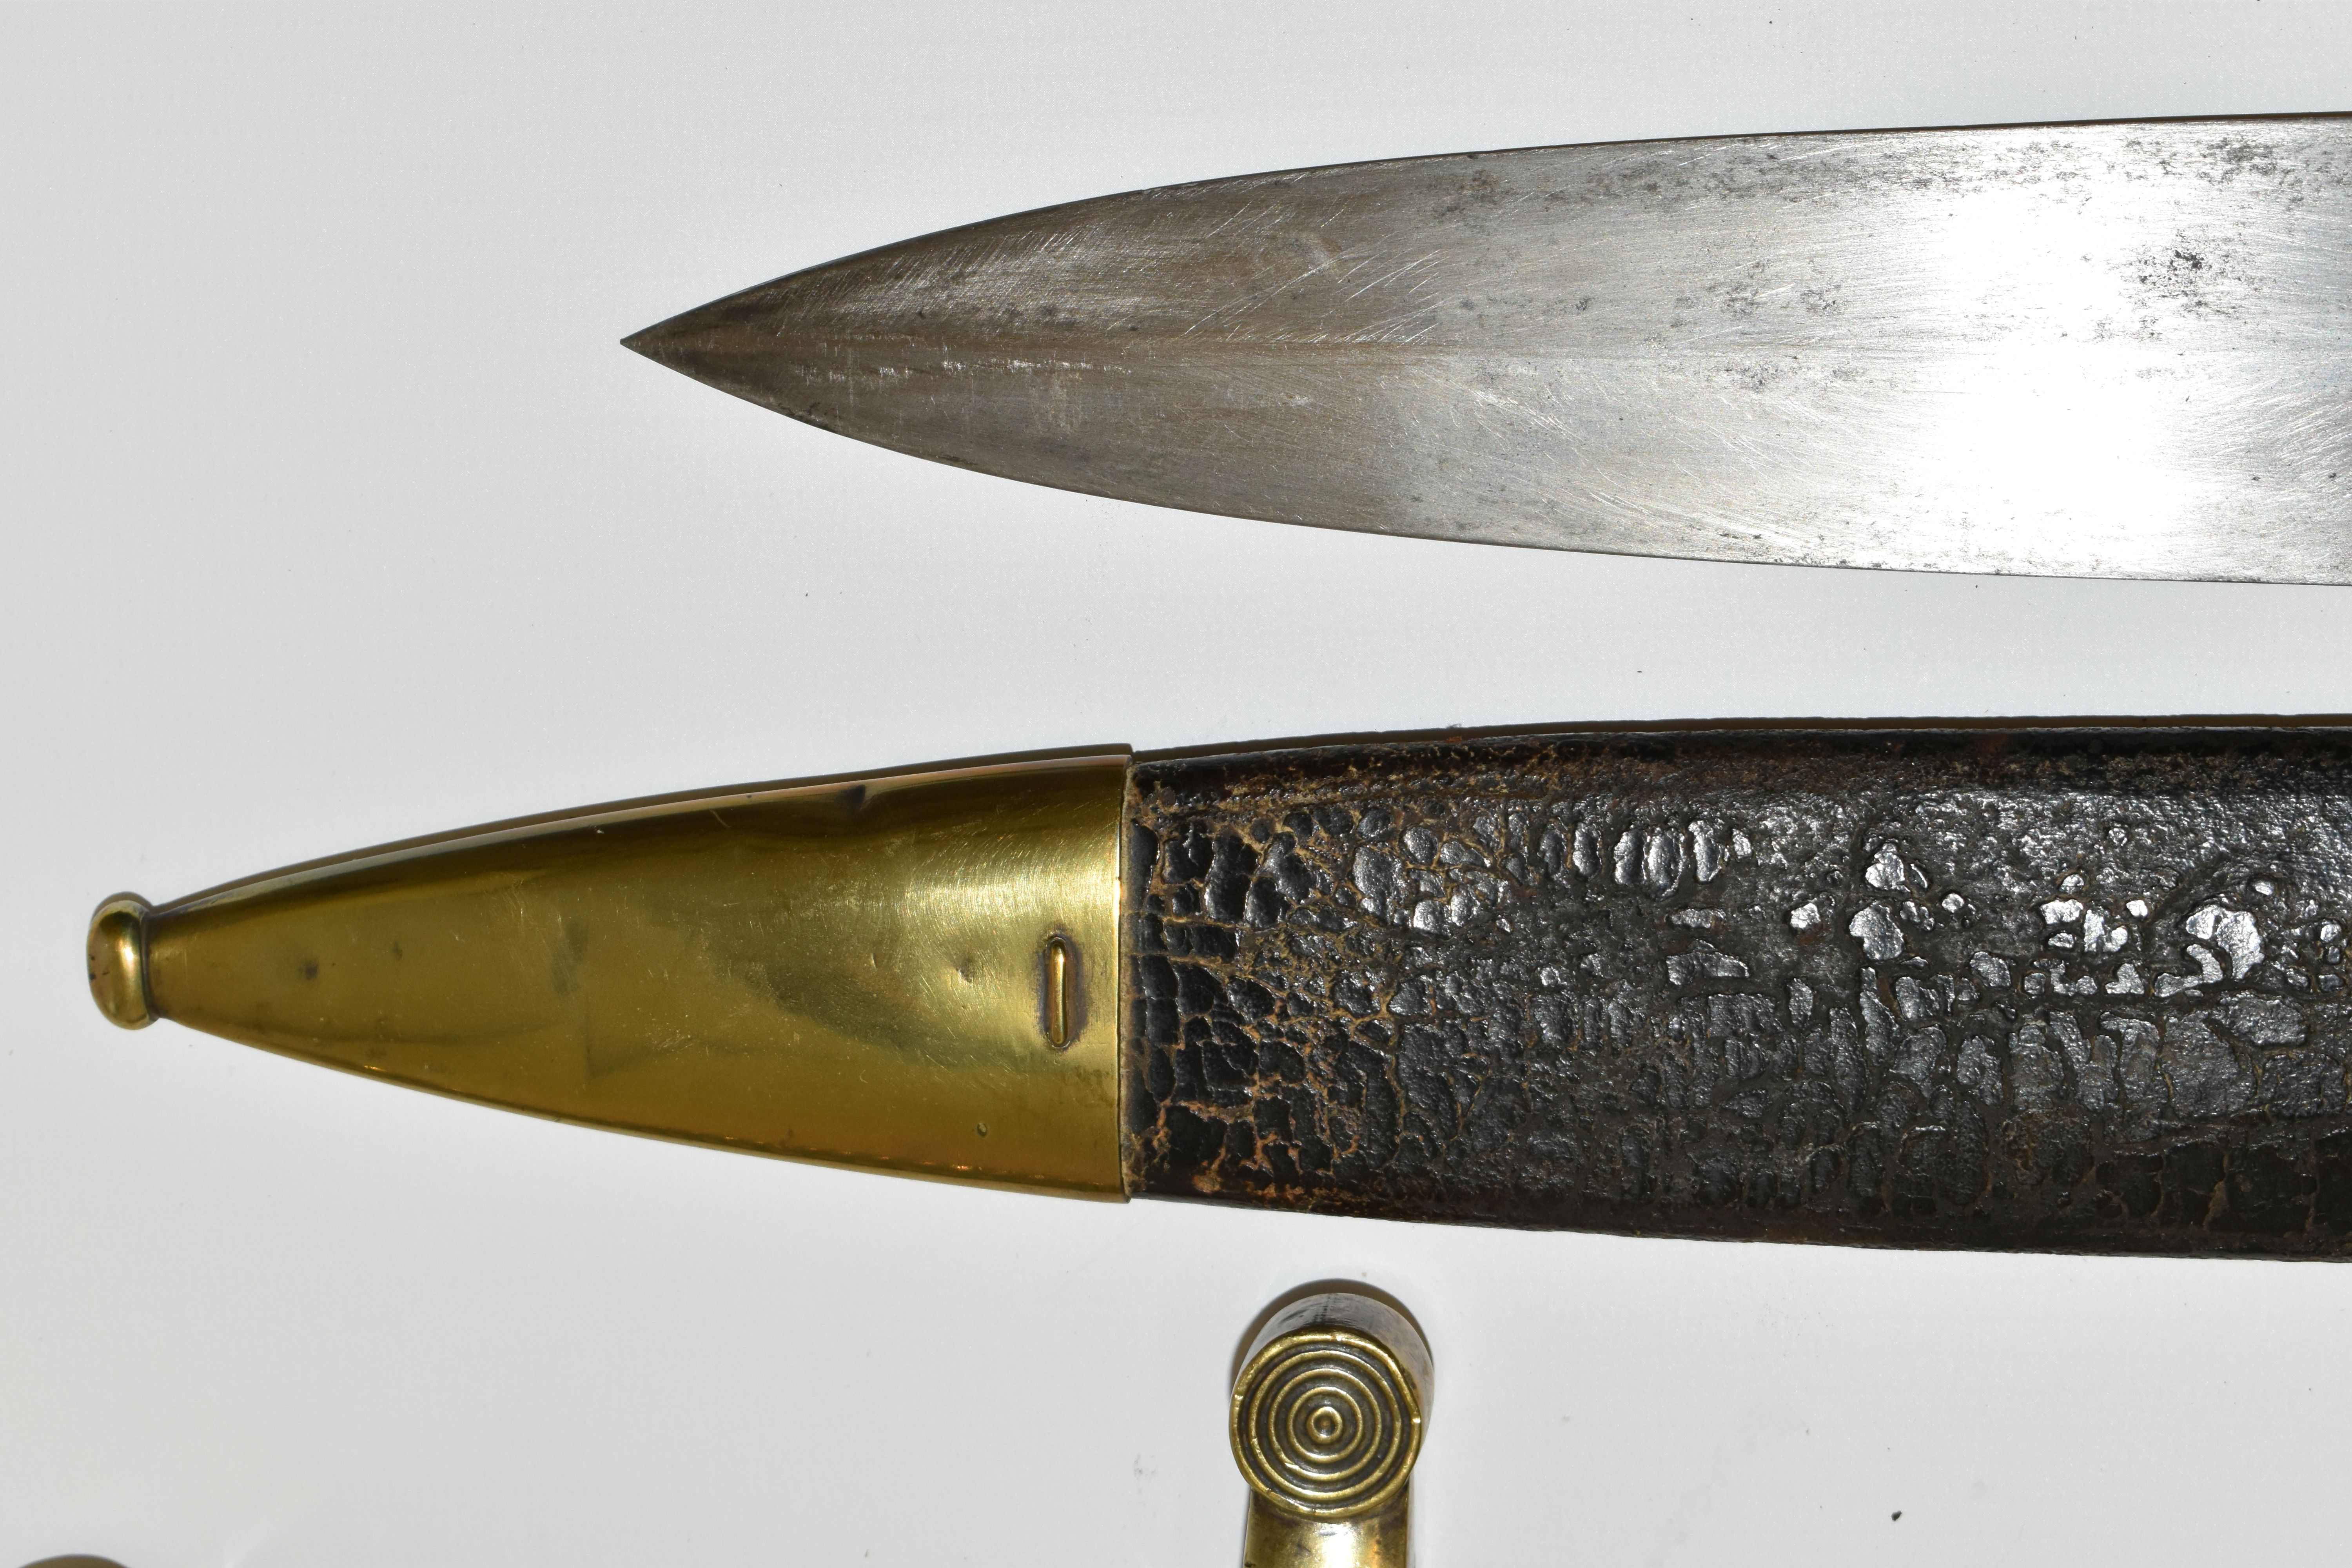 TWO MID 19TH CENTURY FRENCH ARMY CADETS GLADIUS SWORDS, in their original leather covered - Image 3 of 11